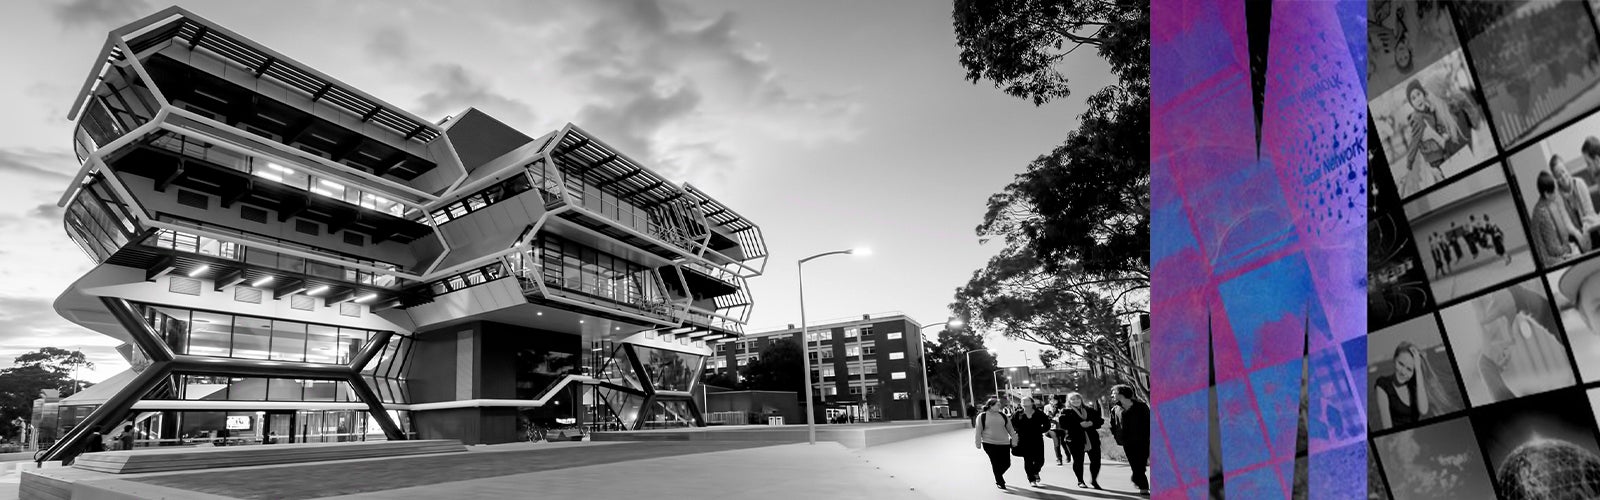 Black and white photo of Monash University with purple M on right side and collage of images on far right